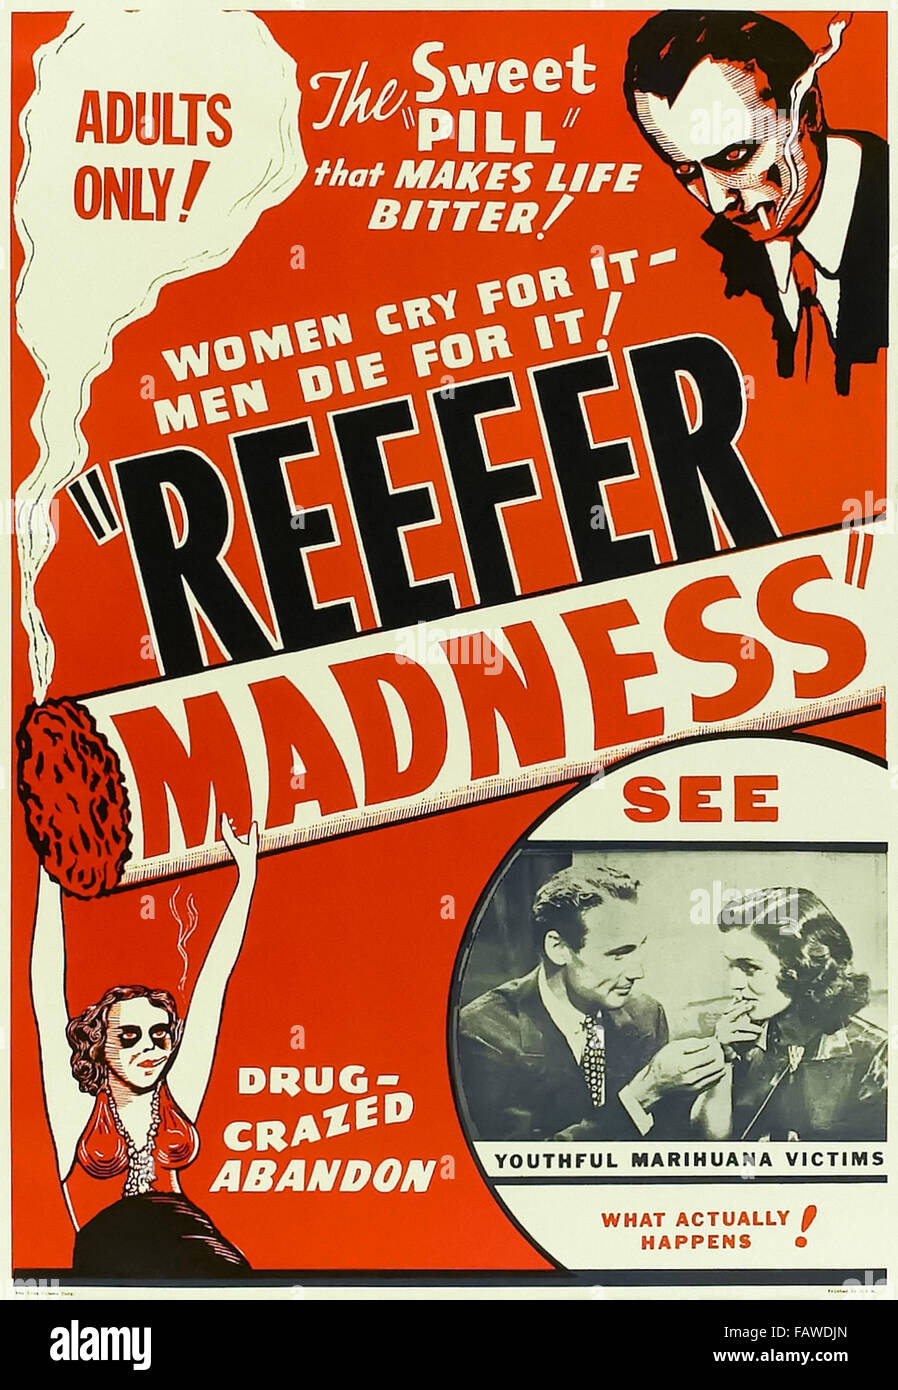 Reefer Madness (1936) directed by Louis J. Gasnier and starring Dorothy Short, Kenneth Craig and Lillian Miles. A bizarre 1930s American propaganda film about teenagers who try marijuana and become hopelessly addicted and go on a crime spree. See more information below. Stock Photo